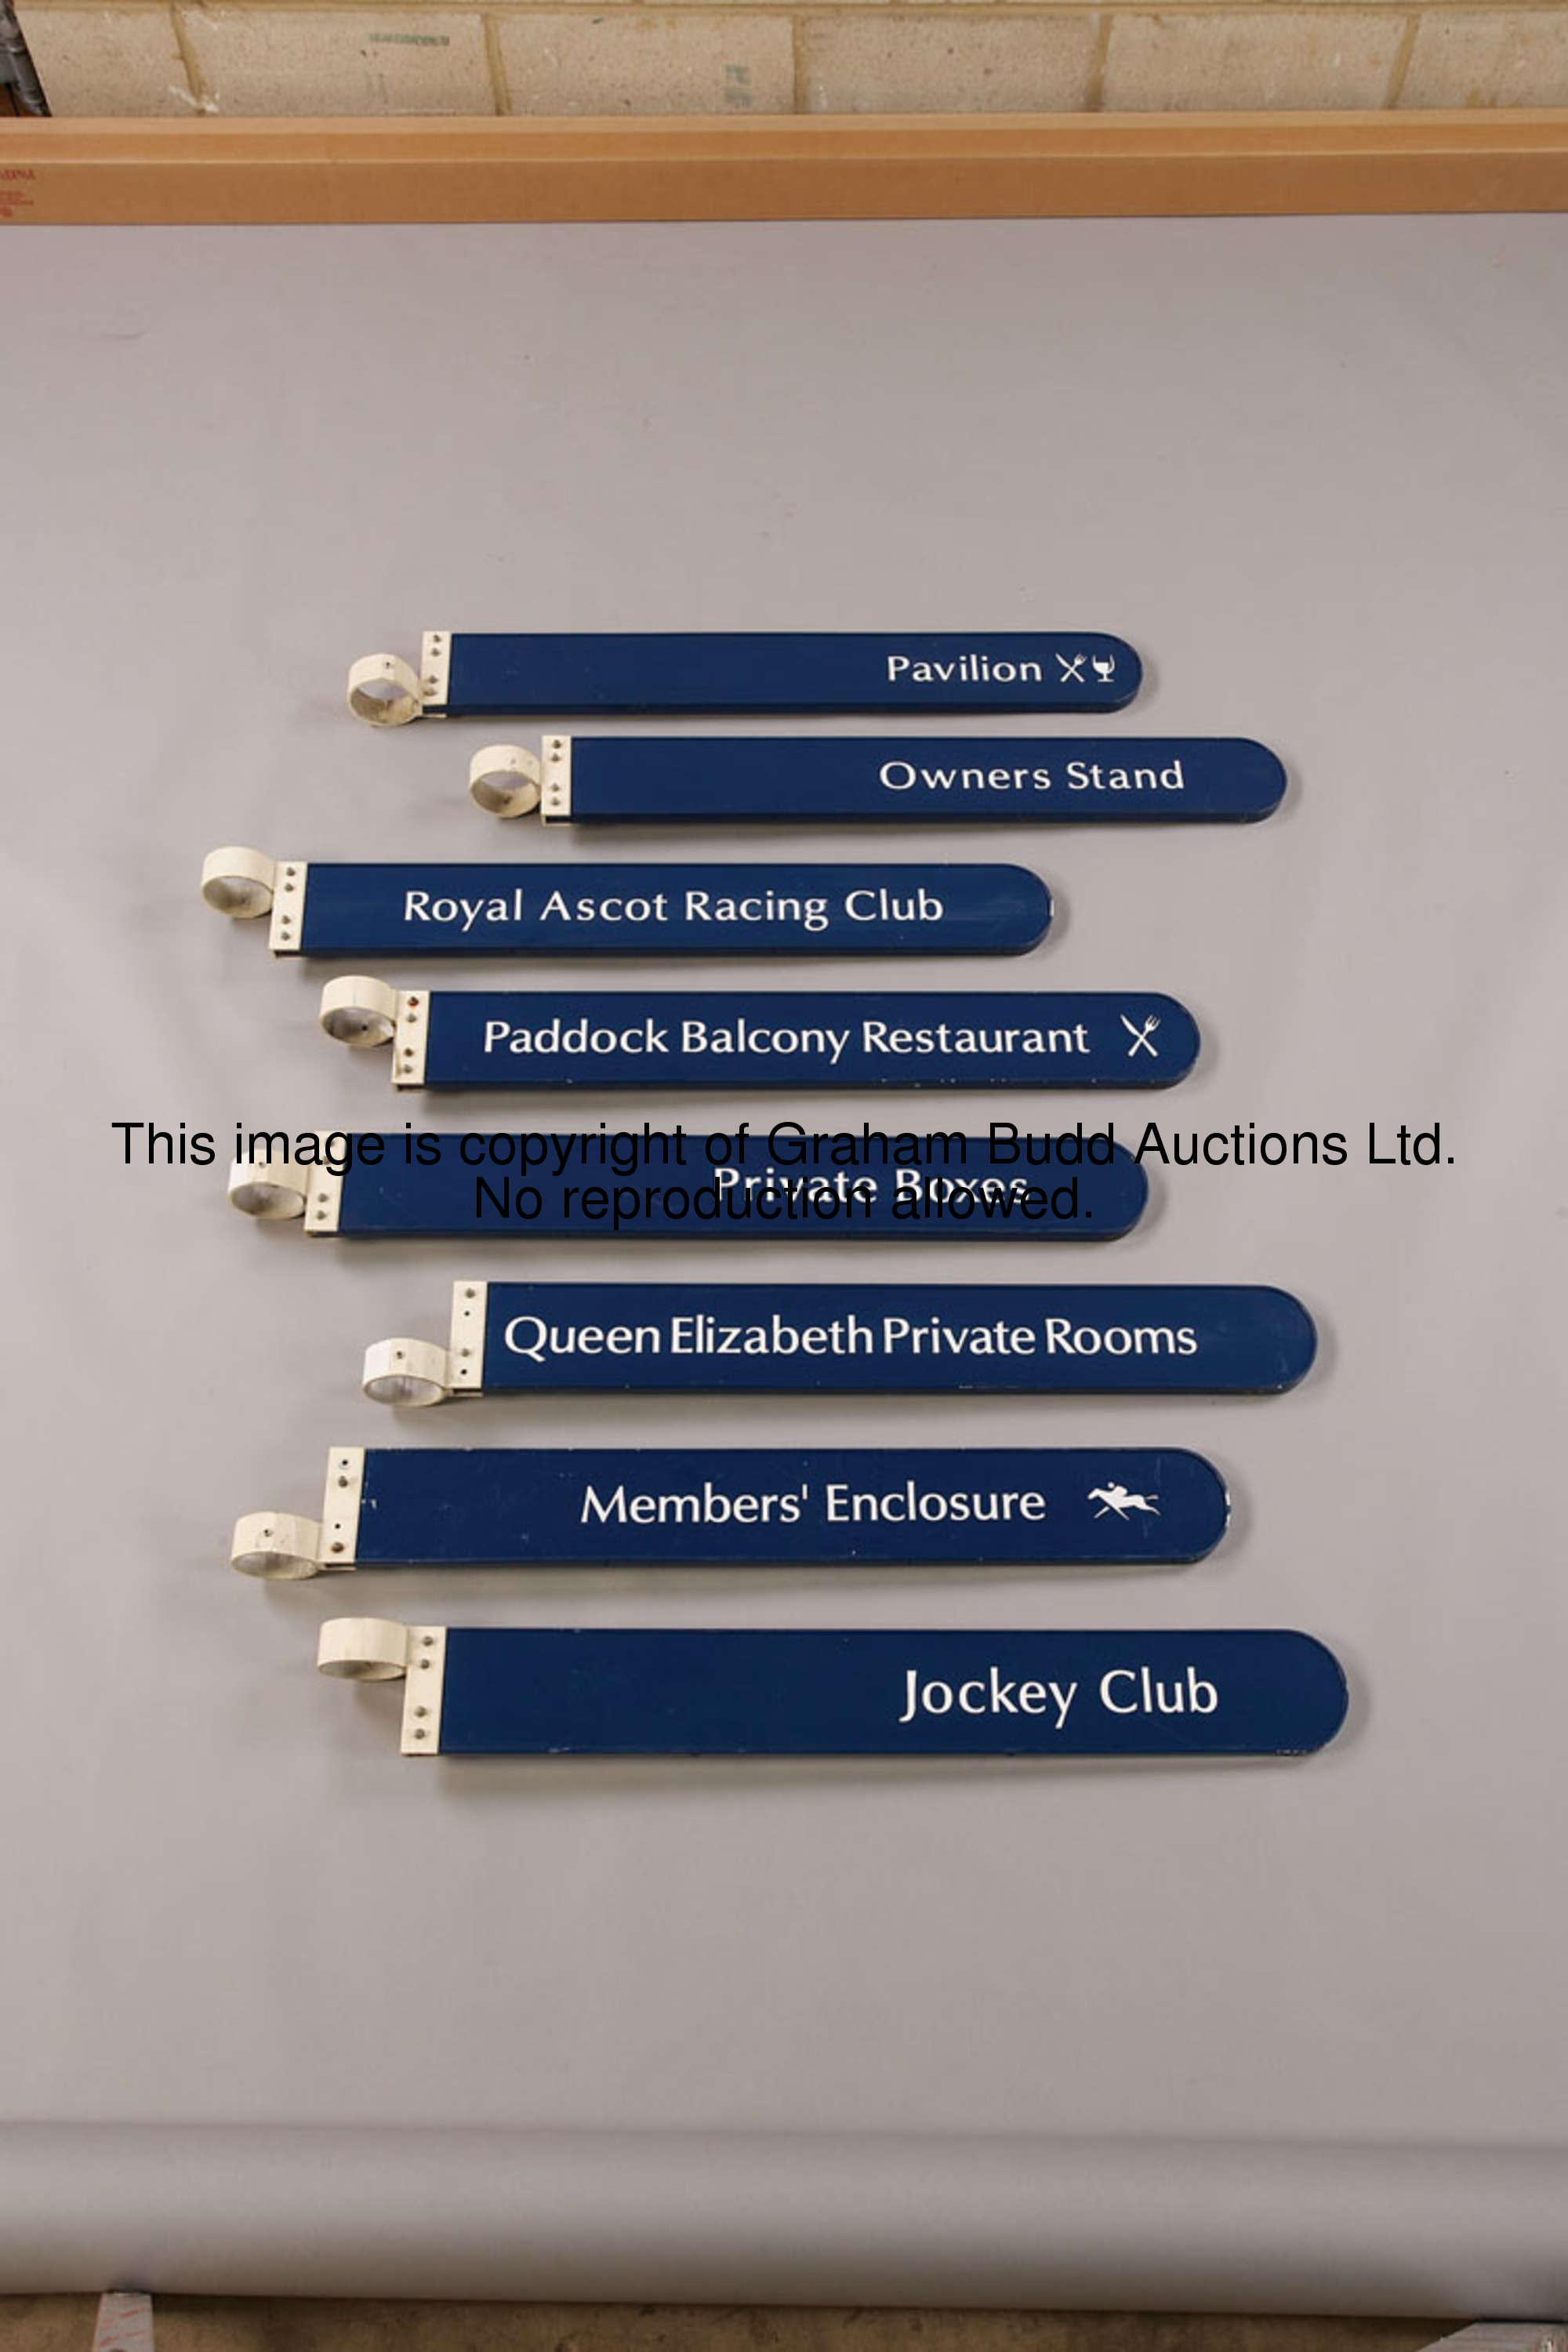 Jockey Club, metal finger-post sign, white lettering on blue, 12 by 93cm., 4 3/4 by 36 1/2in.